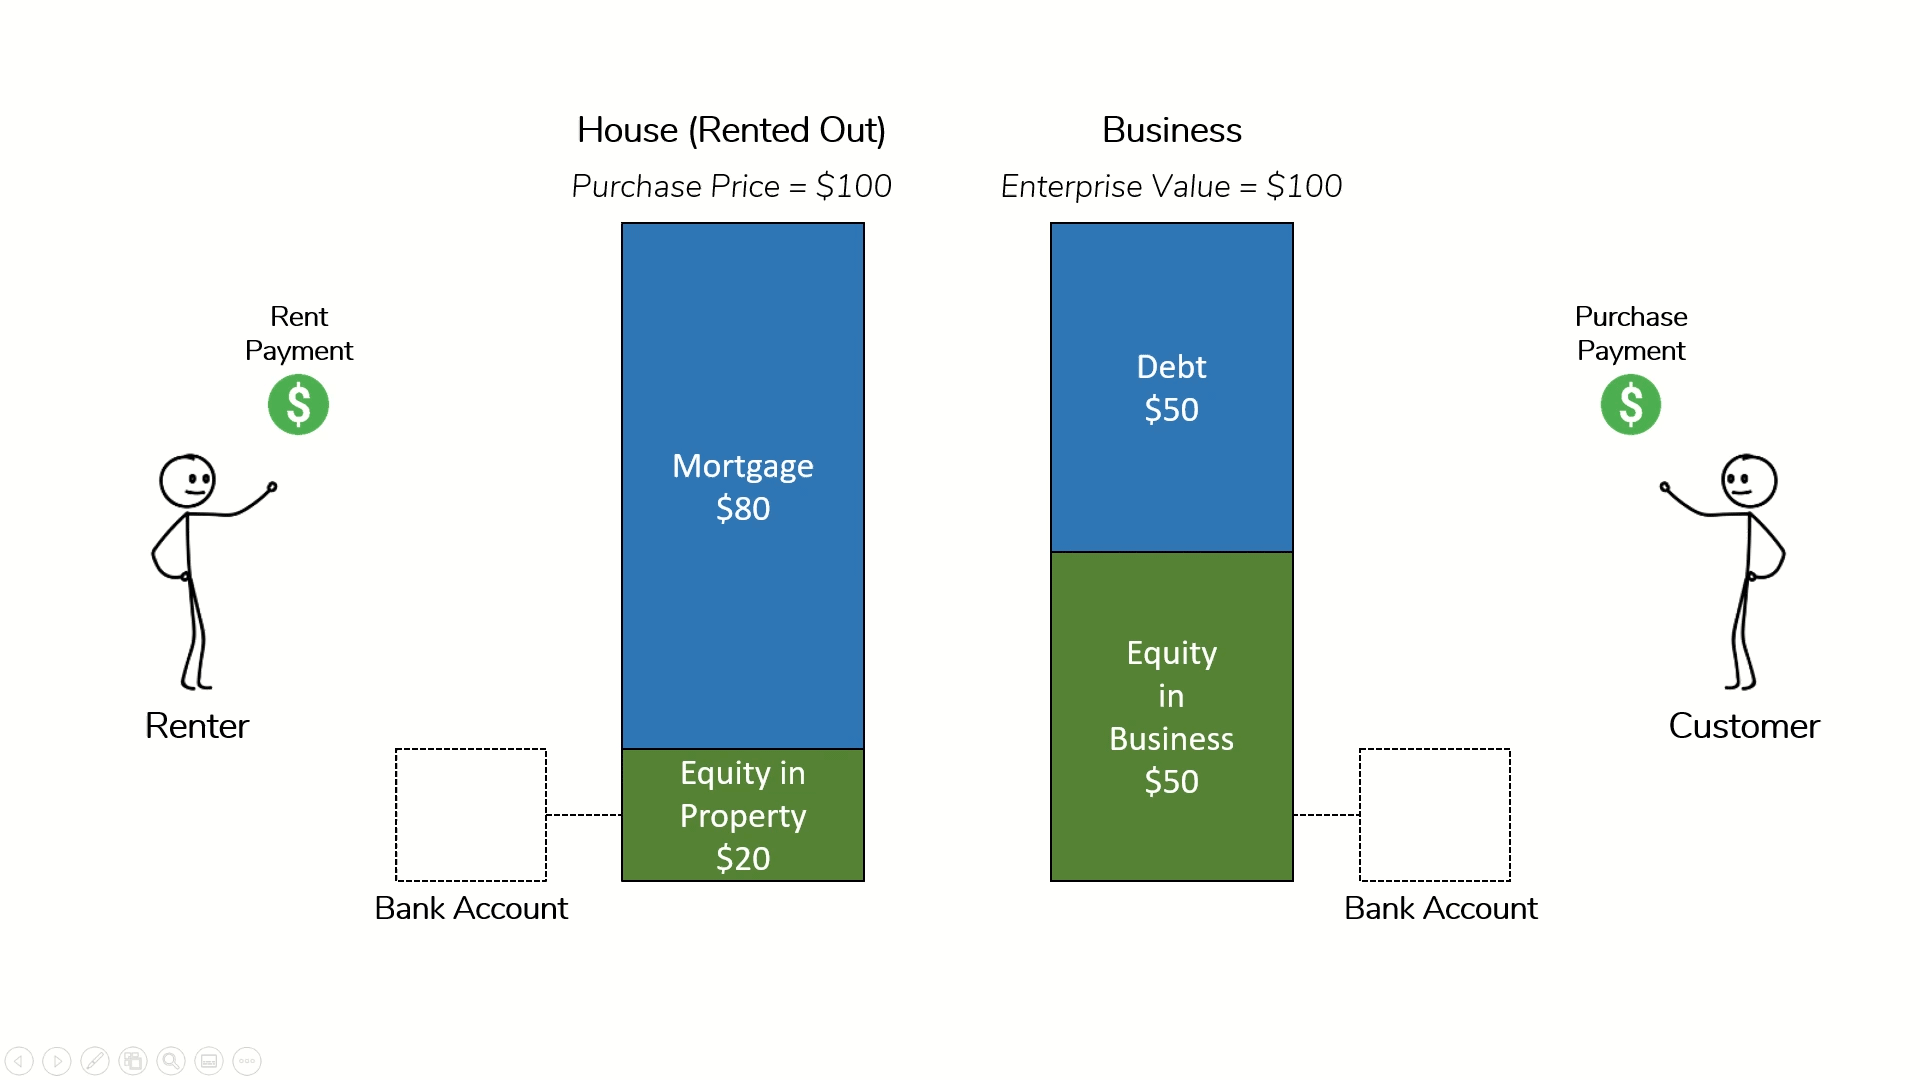 Illustration highlighting the equity value in a home purchase and a business acquisition